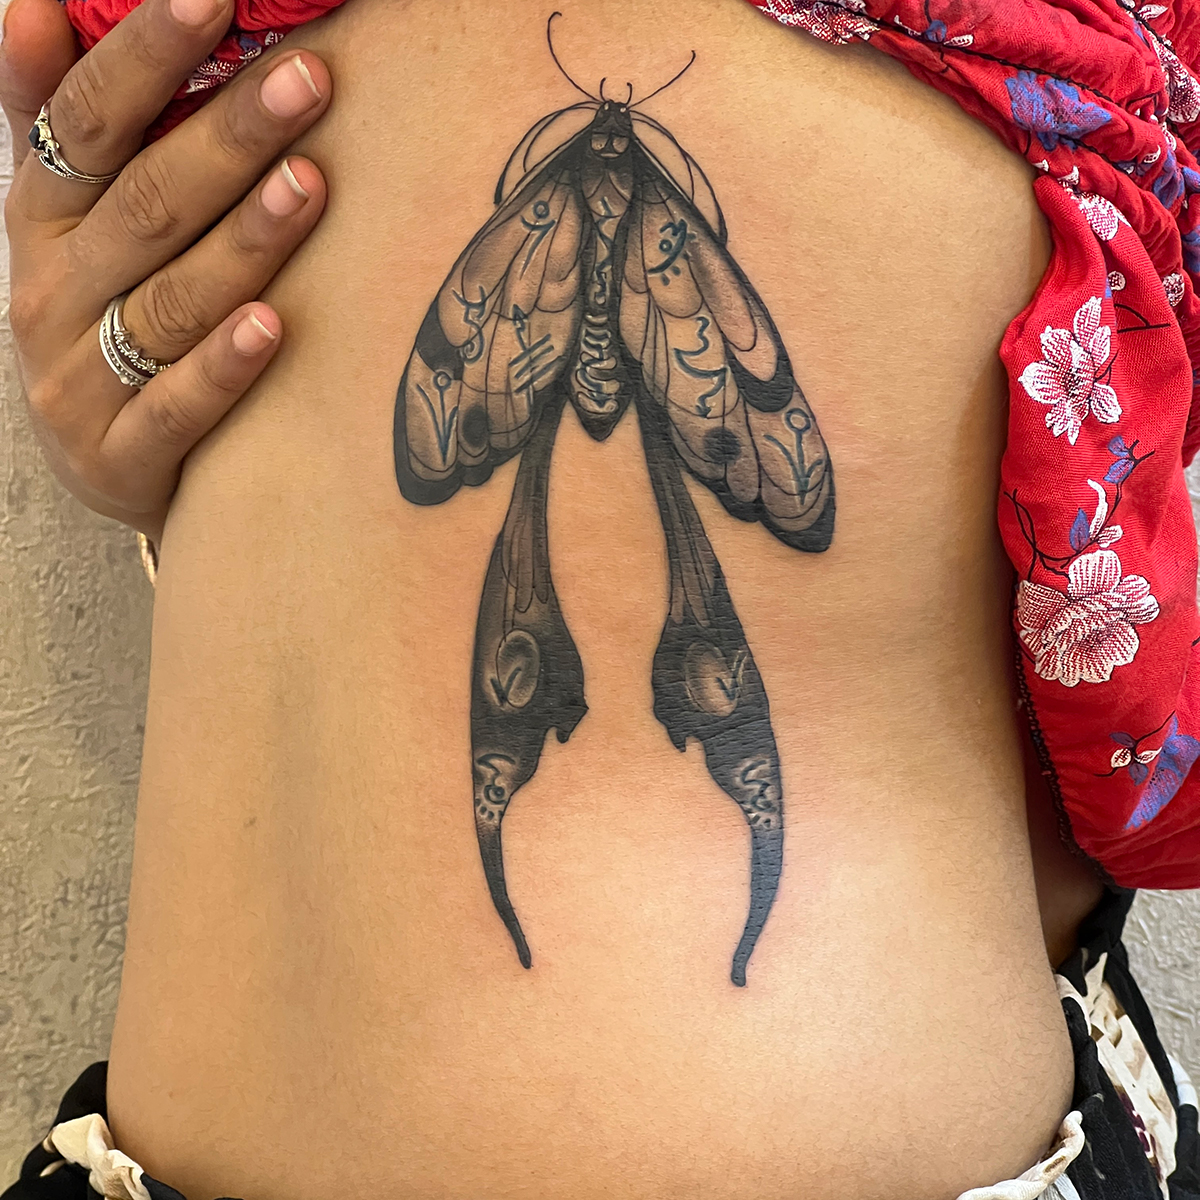 a woman with a butterfly tattoo on her back photo  Free Étatsunis Image  on Unsplash